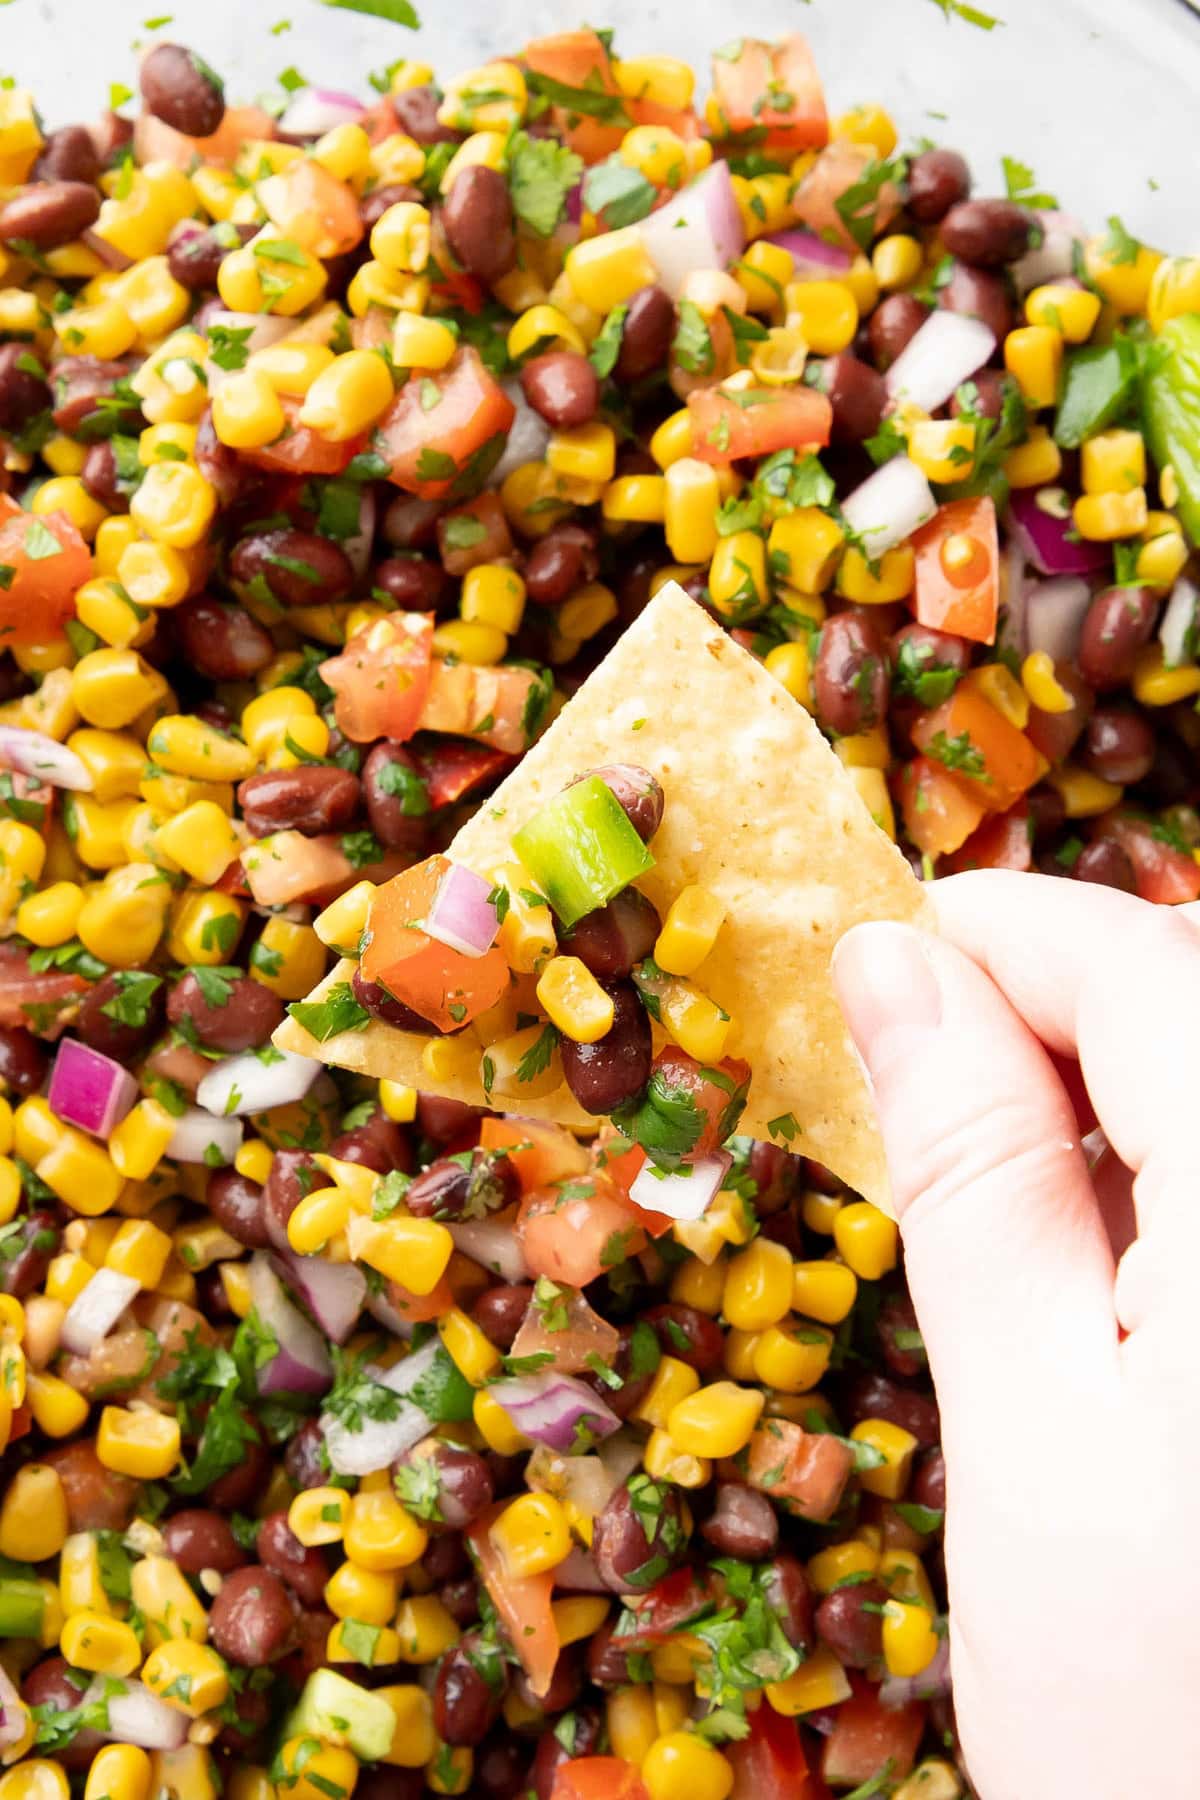 tortilla chip dipping into a bowl of this Mexican-inspired side